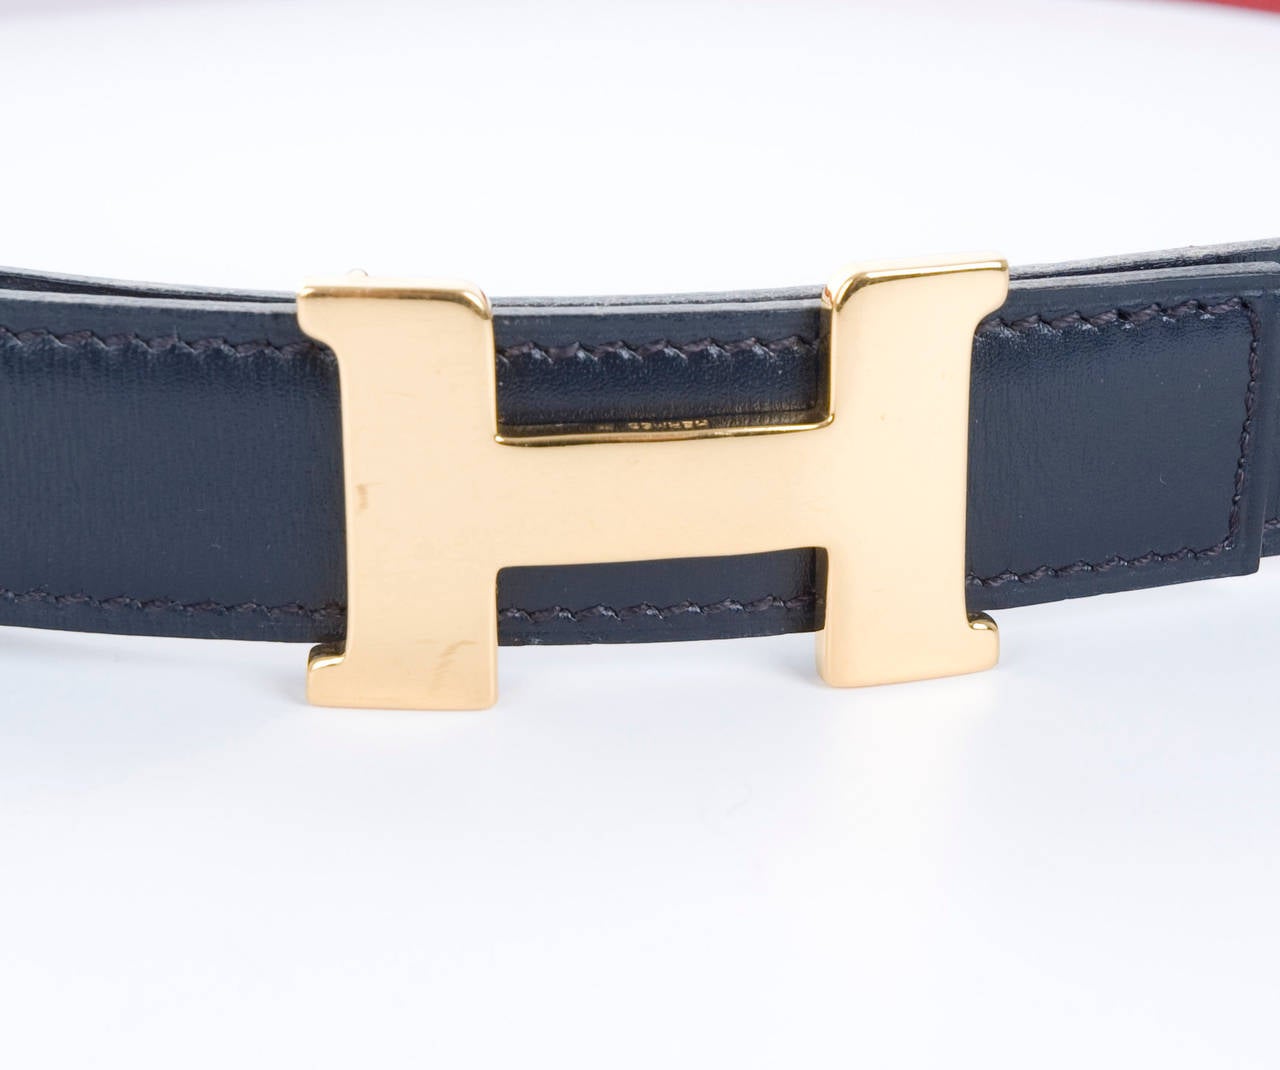 Small Hermes Belt in black and red leather.
Stamped T in a circle from 1990
H Buckle in gold tone.
Size 70cm
Length 34